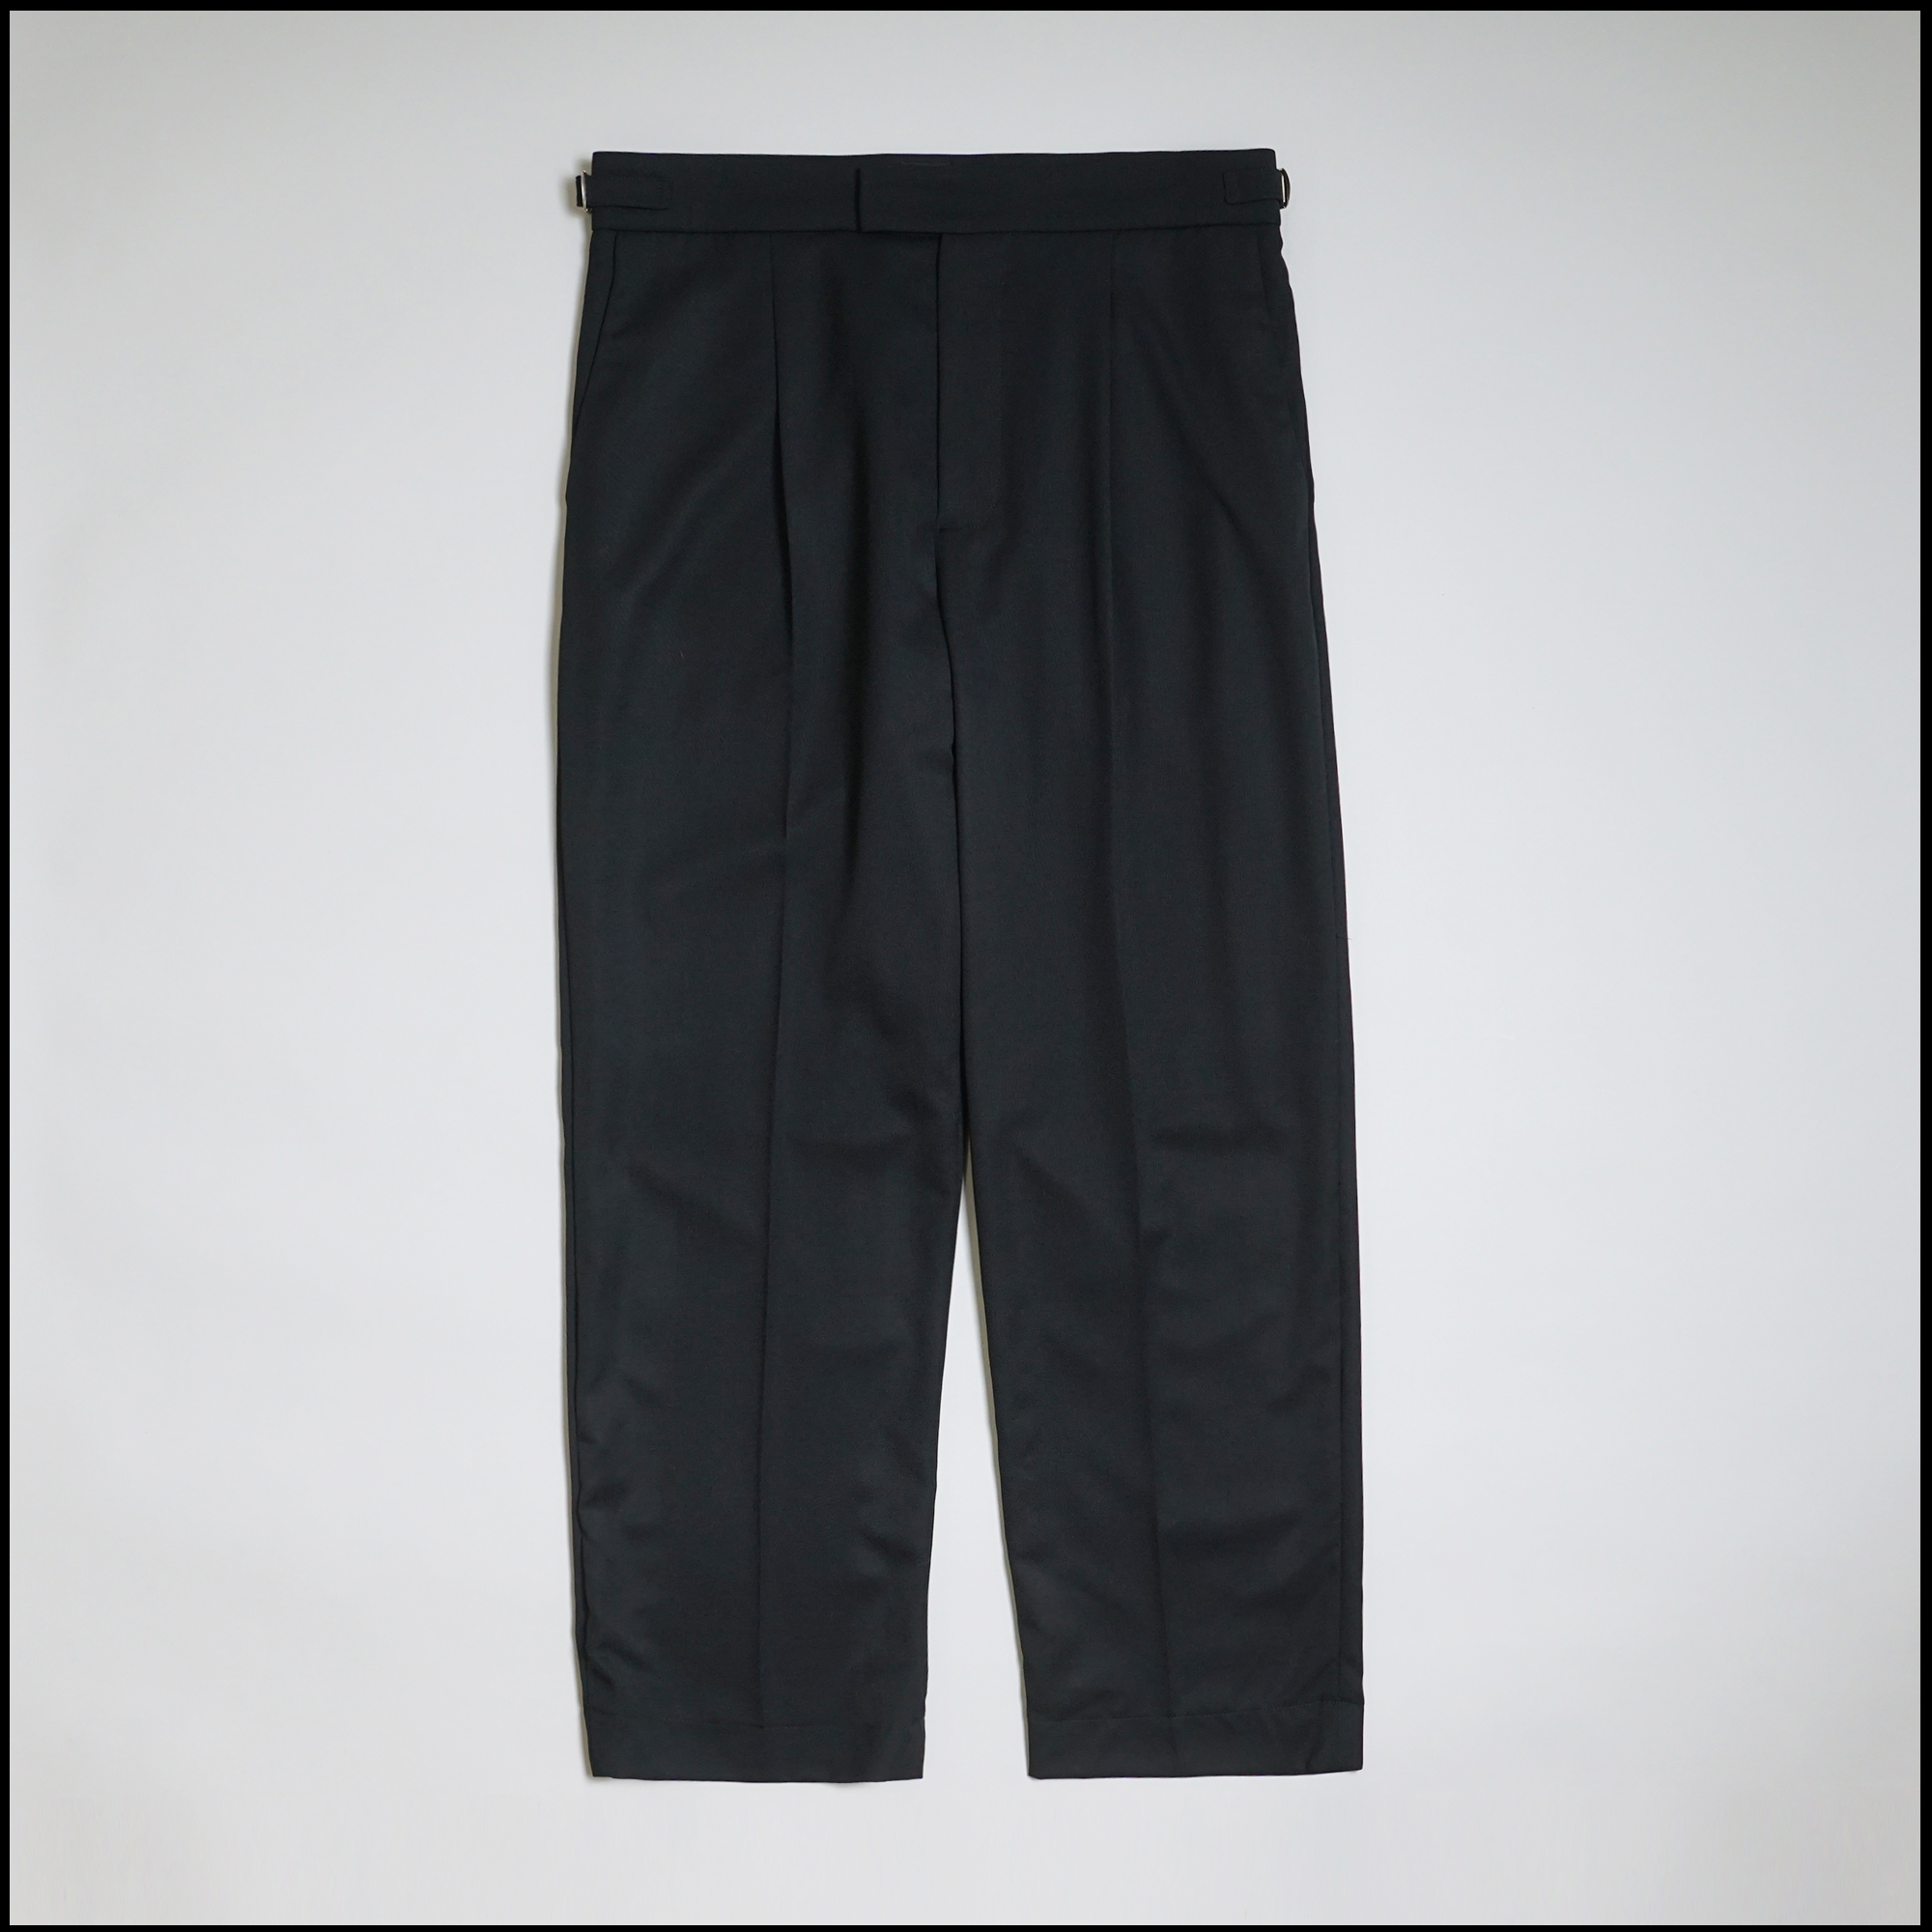 Night Pants in Black color by Arpenteur for C'H'C'M'